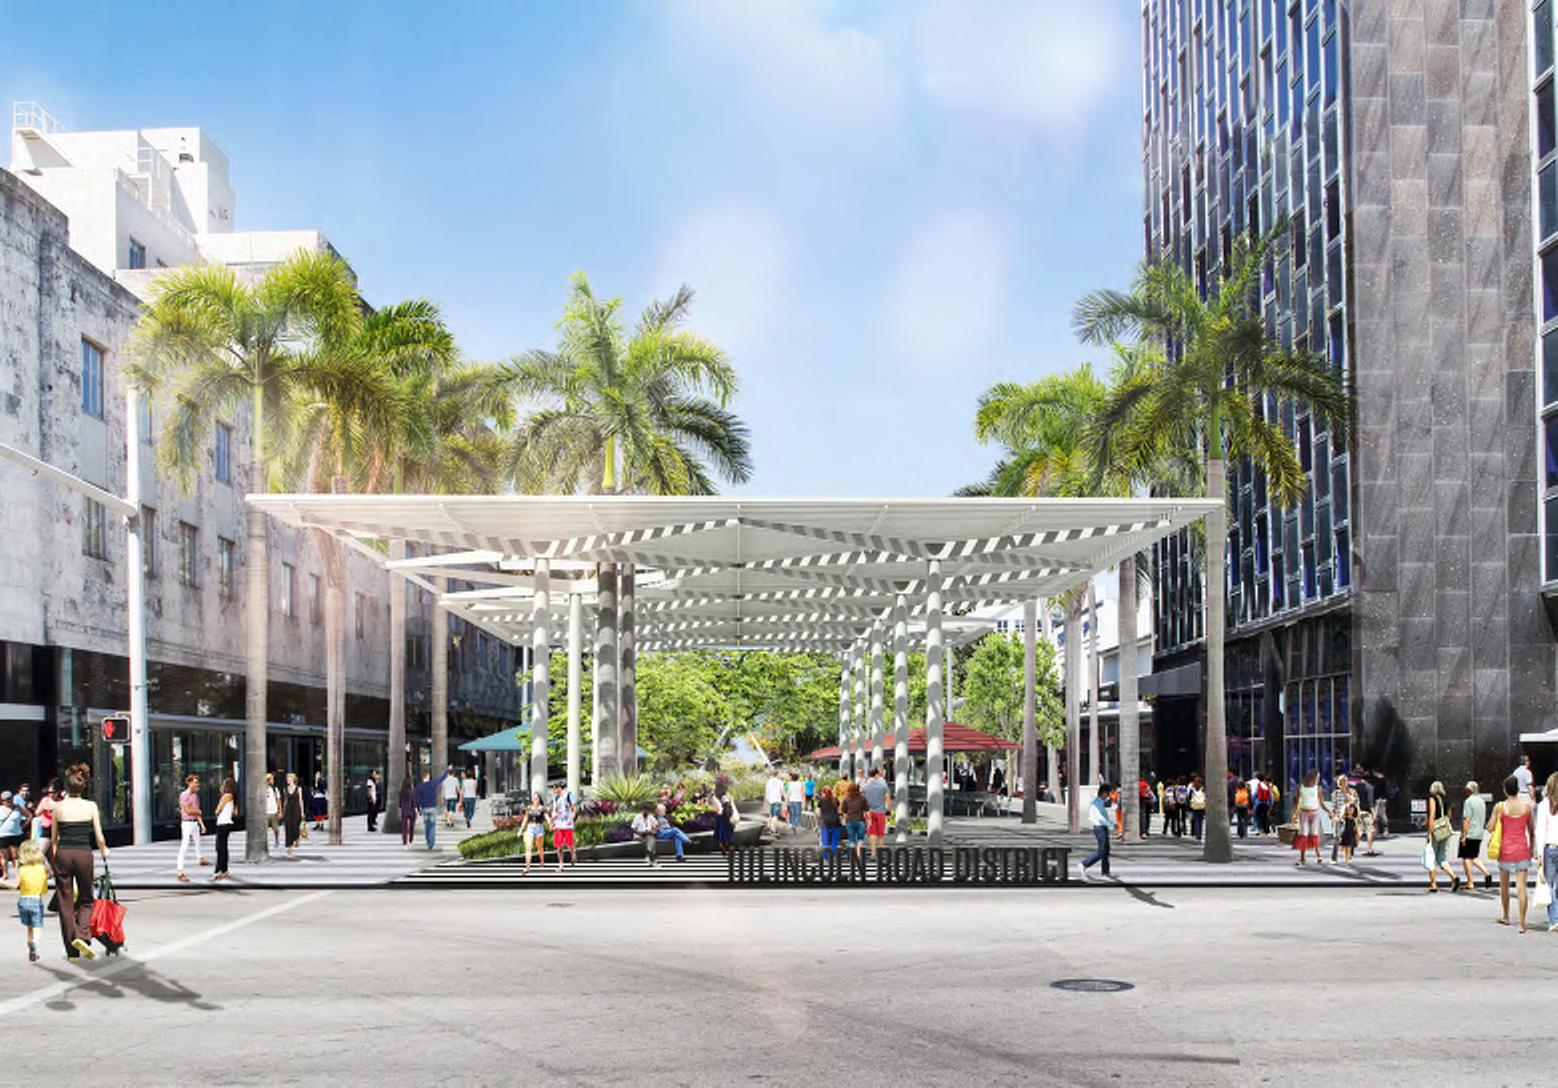 Lincoln Road is Getting a Facelift in 2020